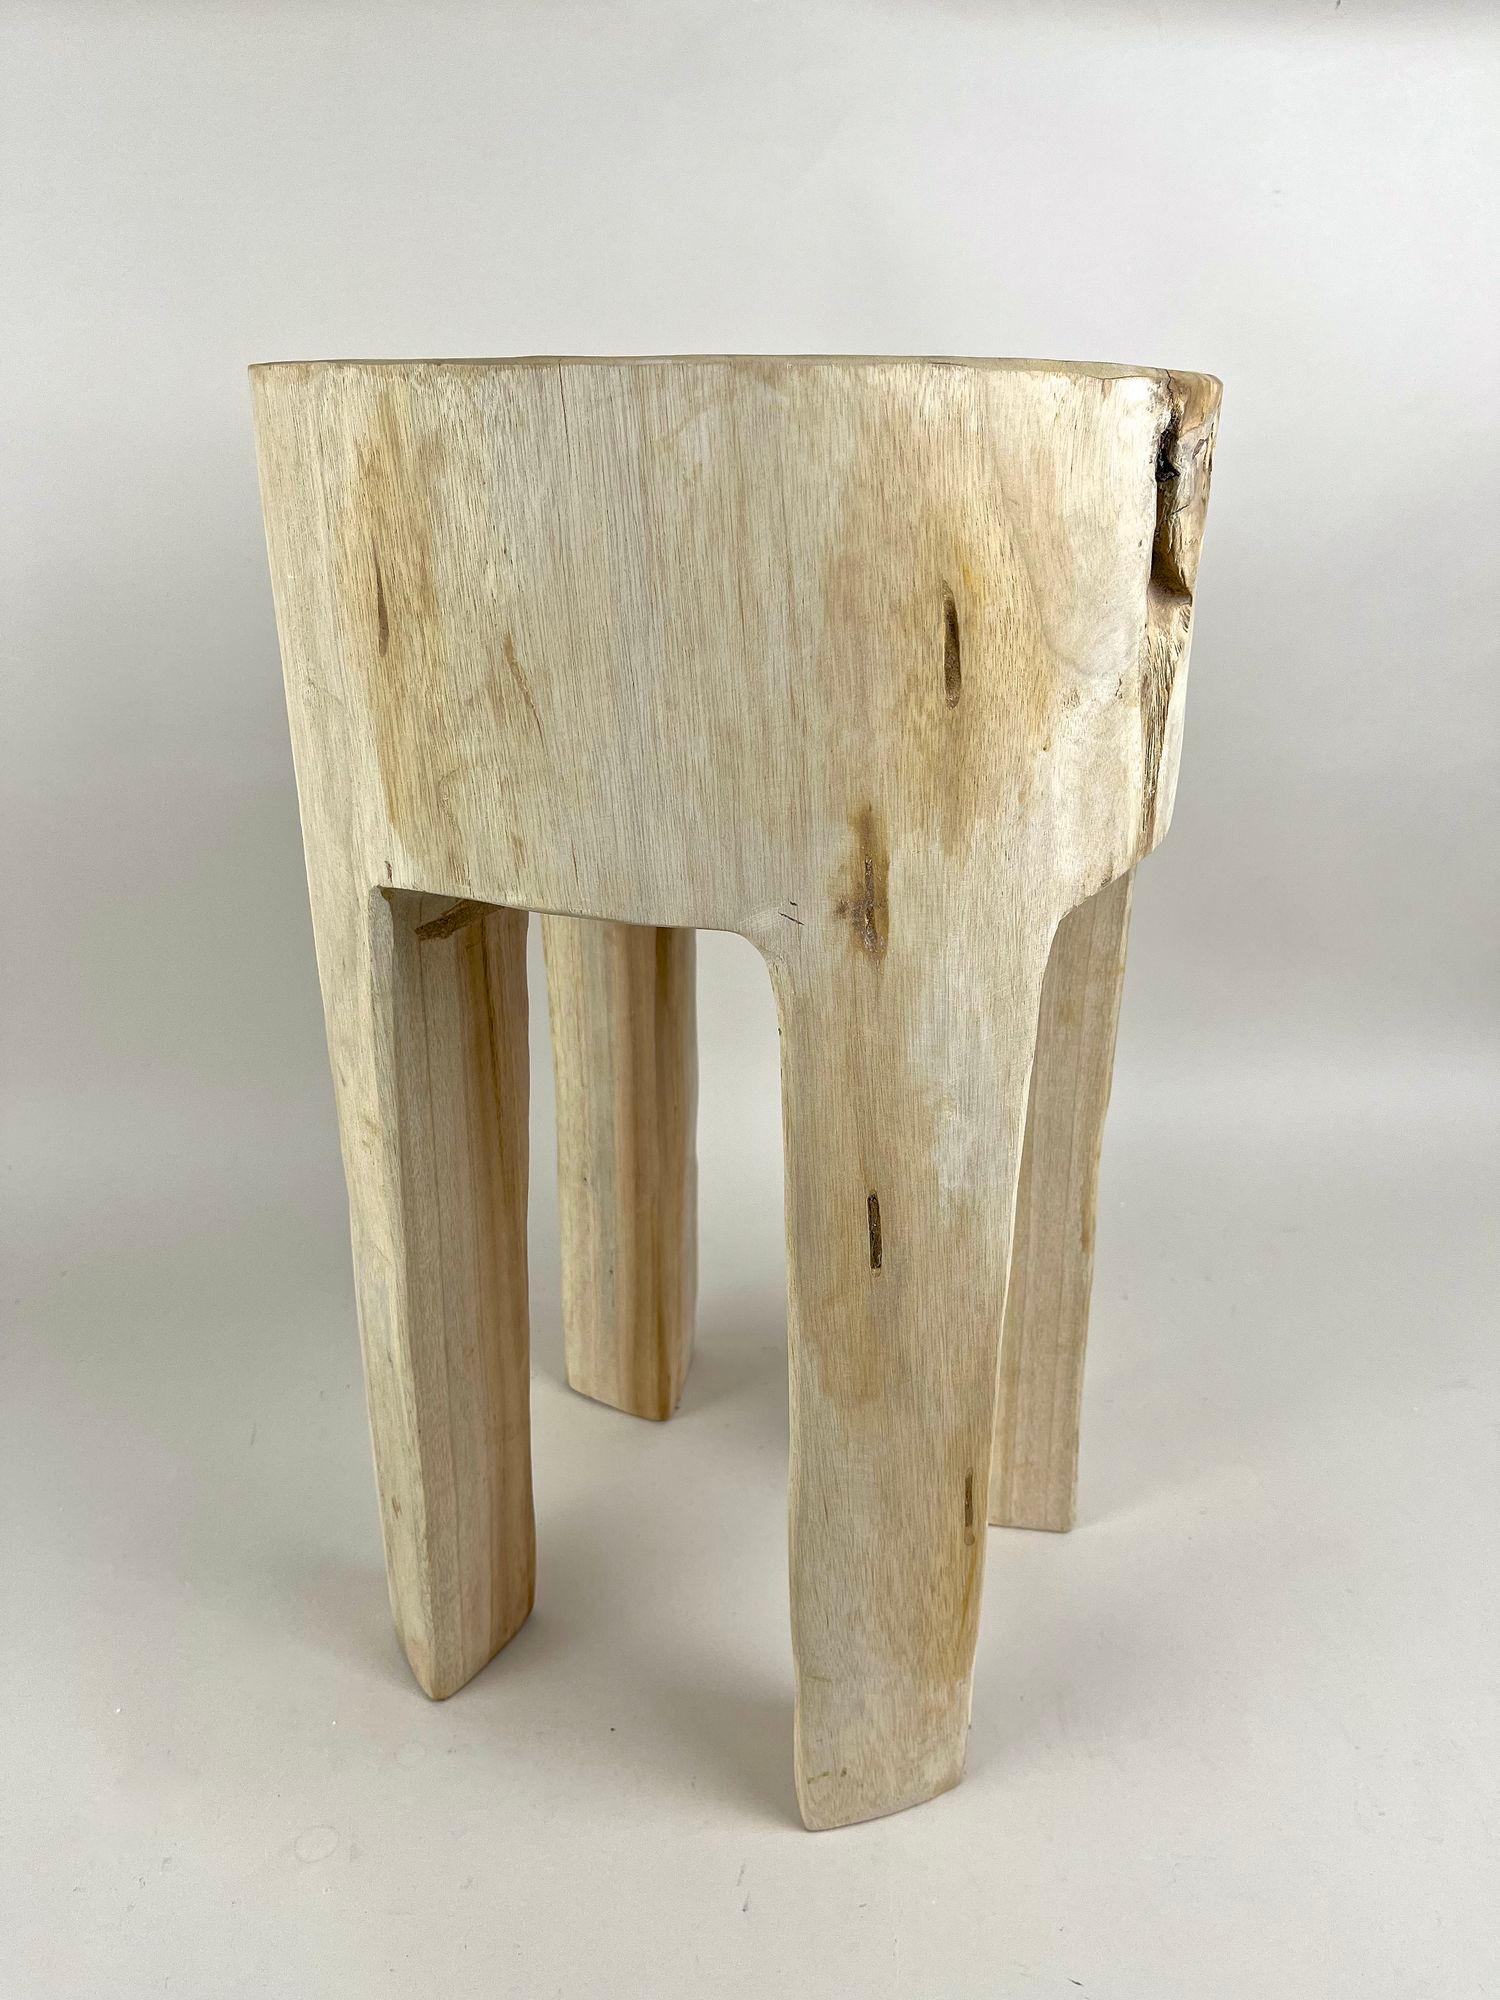 Rustic Handcarved Teak Wood Side Table/ Stool, Bleached, IDN 2024 In Excellent Condition For Sale In Lichtenberg, AT